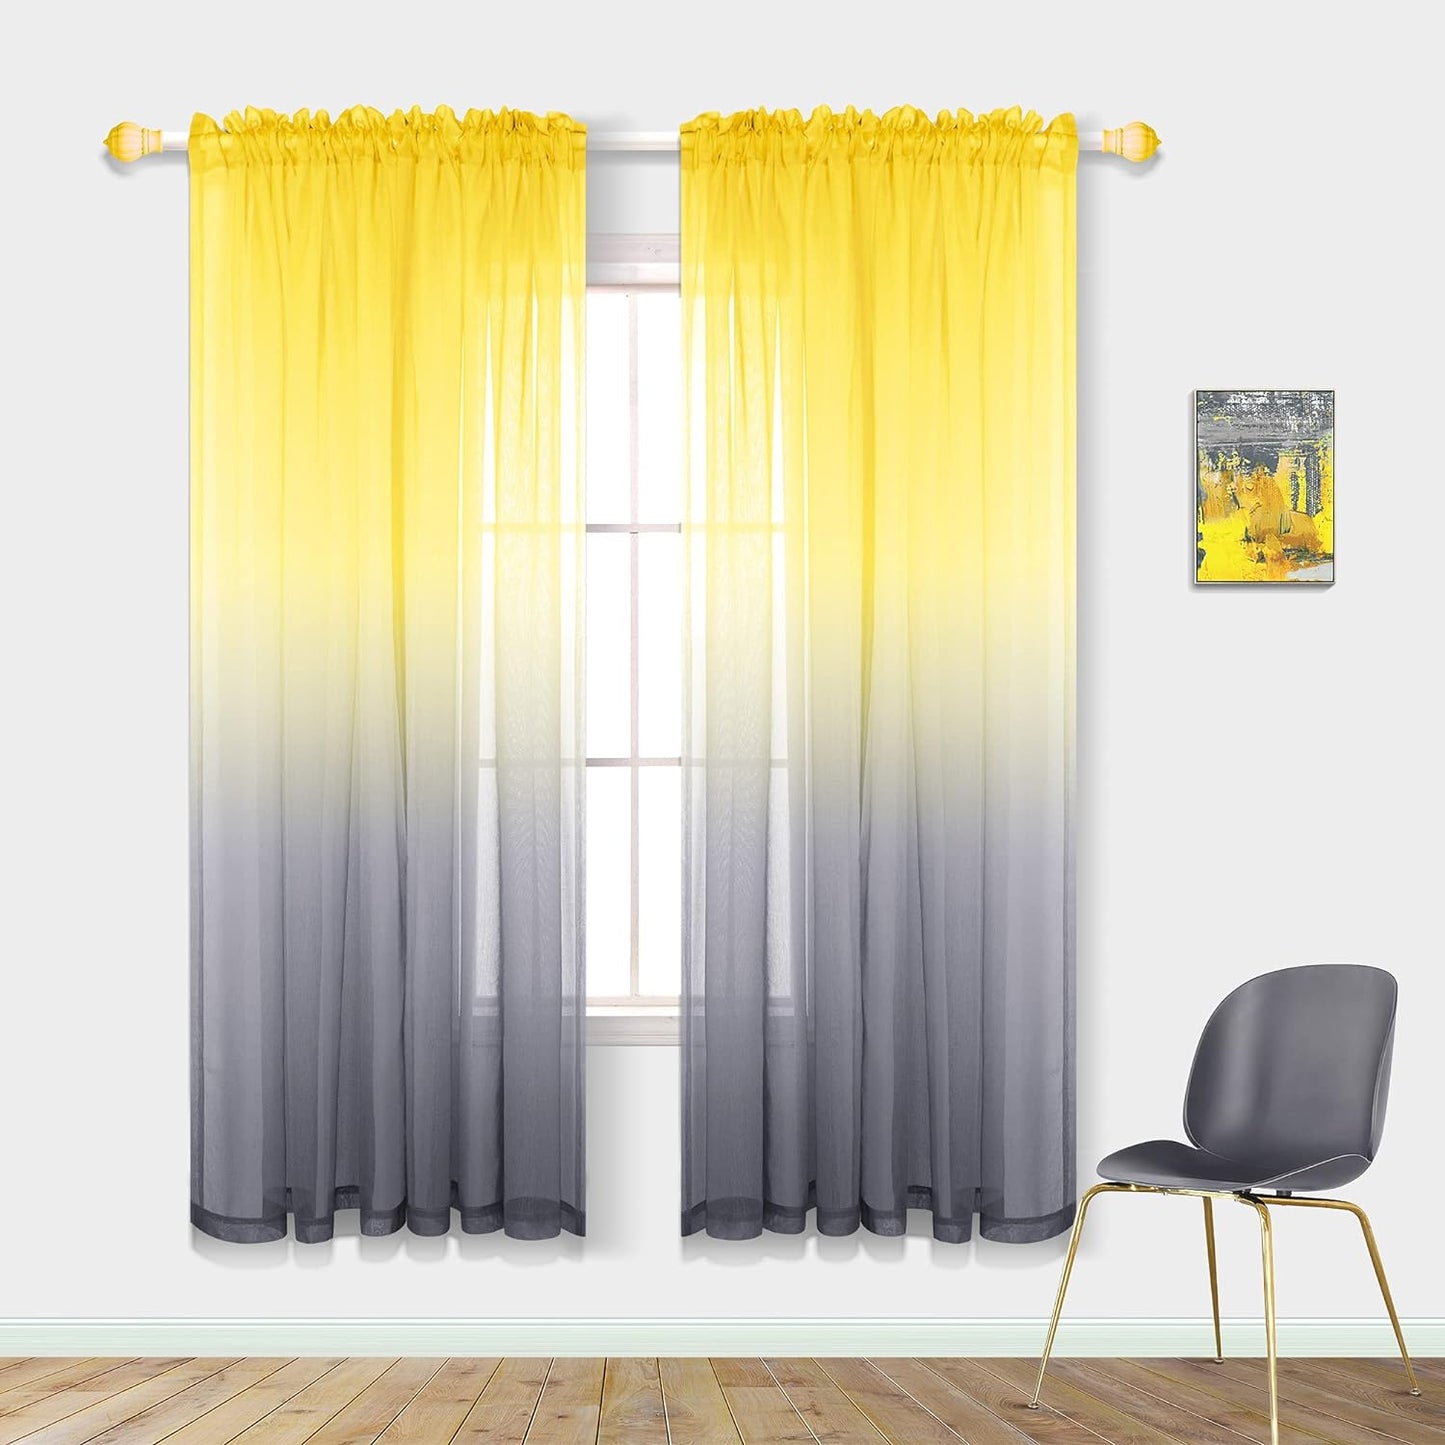 Spring Sheer Curtains for Living Room with Rod Pocket Window Treatments Decor 84 Inch Length Bedroom Curtain Set of 2 Panels Yellow and Grey Gray  PITALK TEXTILE Yellow And Grey 52X63 